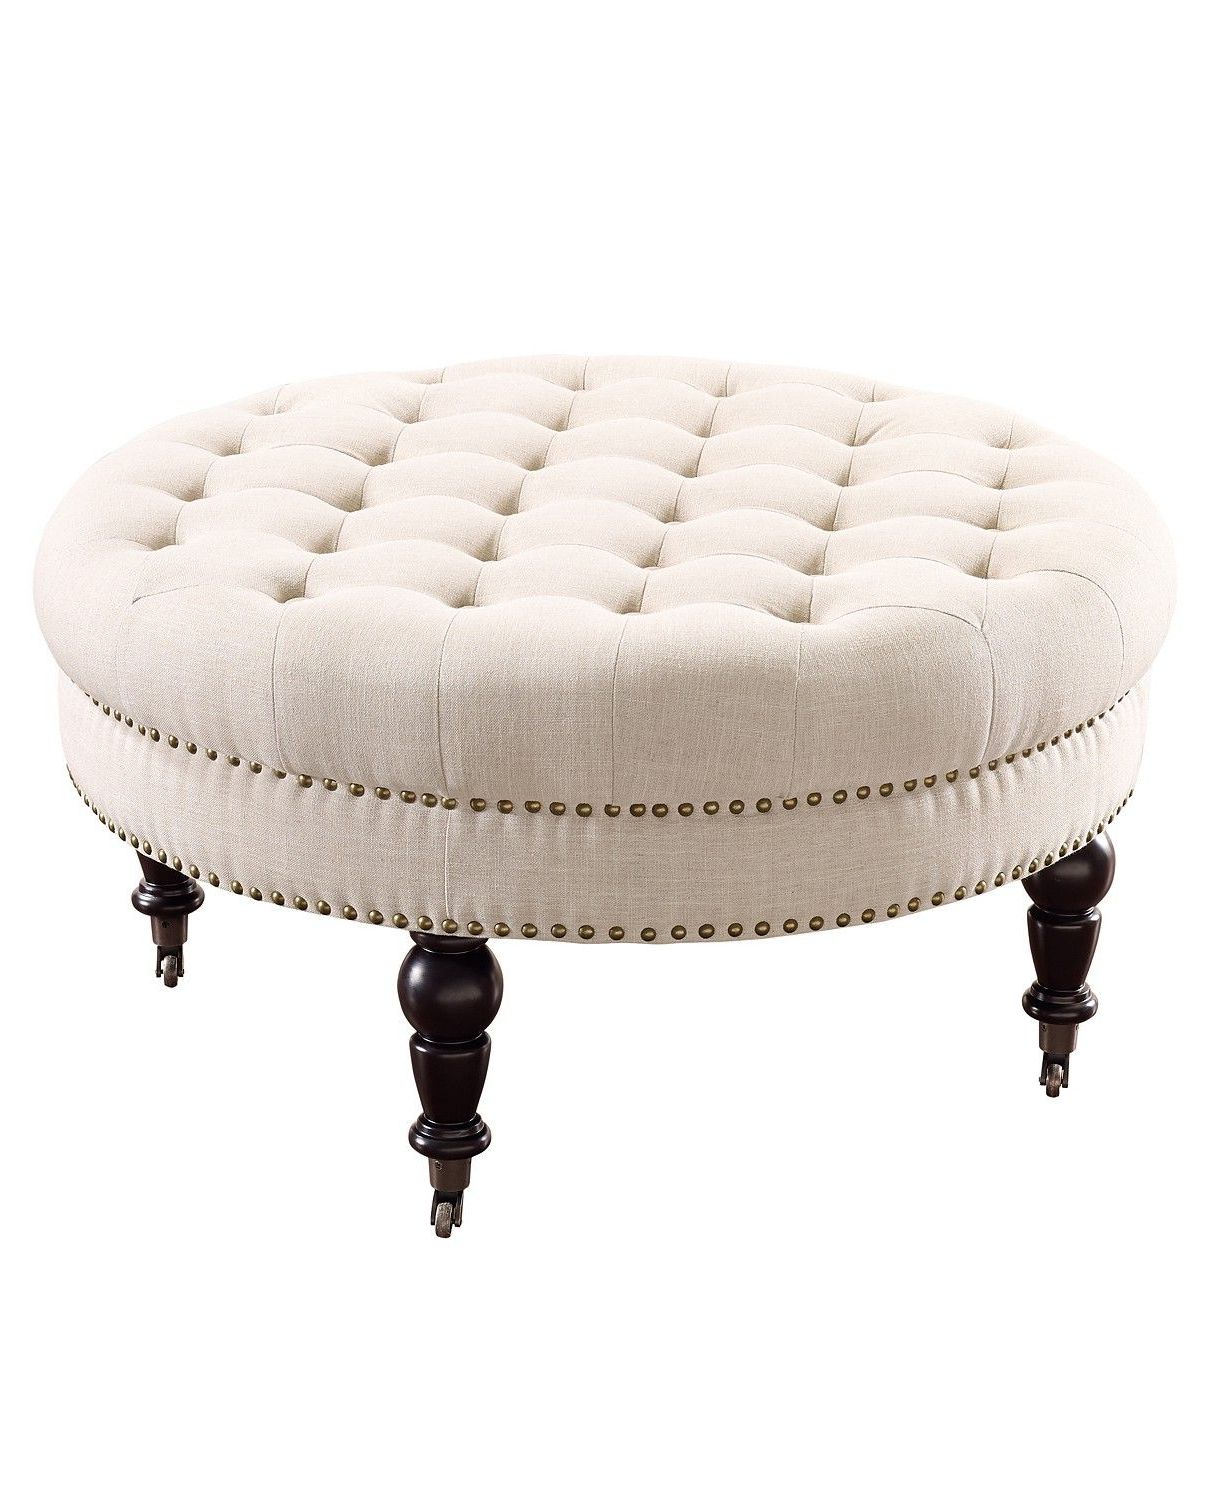 Most Popular Linon Home Décor Isabelle Round Tufted Ottoman & Reviews – Furniture In Caramel Leather And Bronze Steel Tufted Square Ottomans (View 3 of 10)